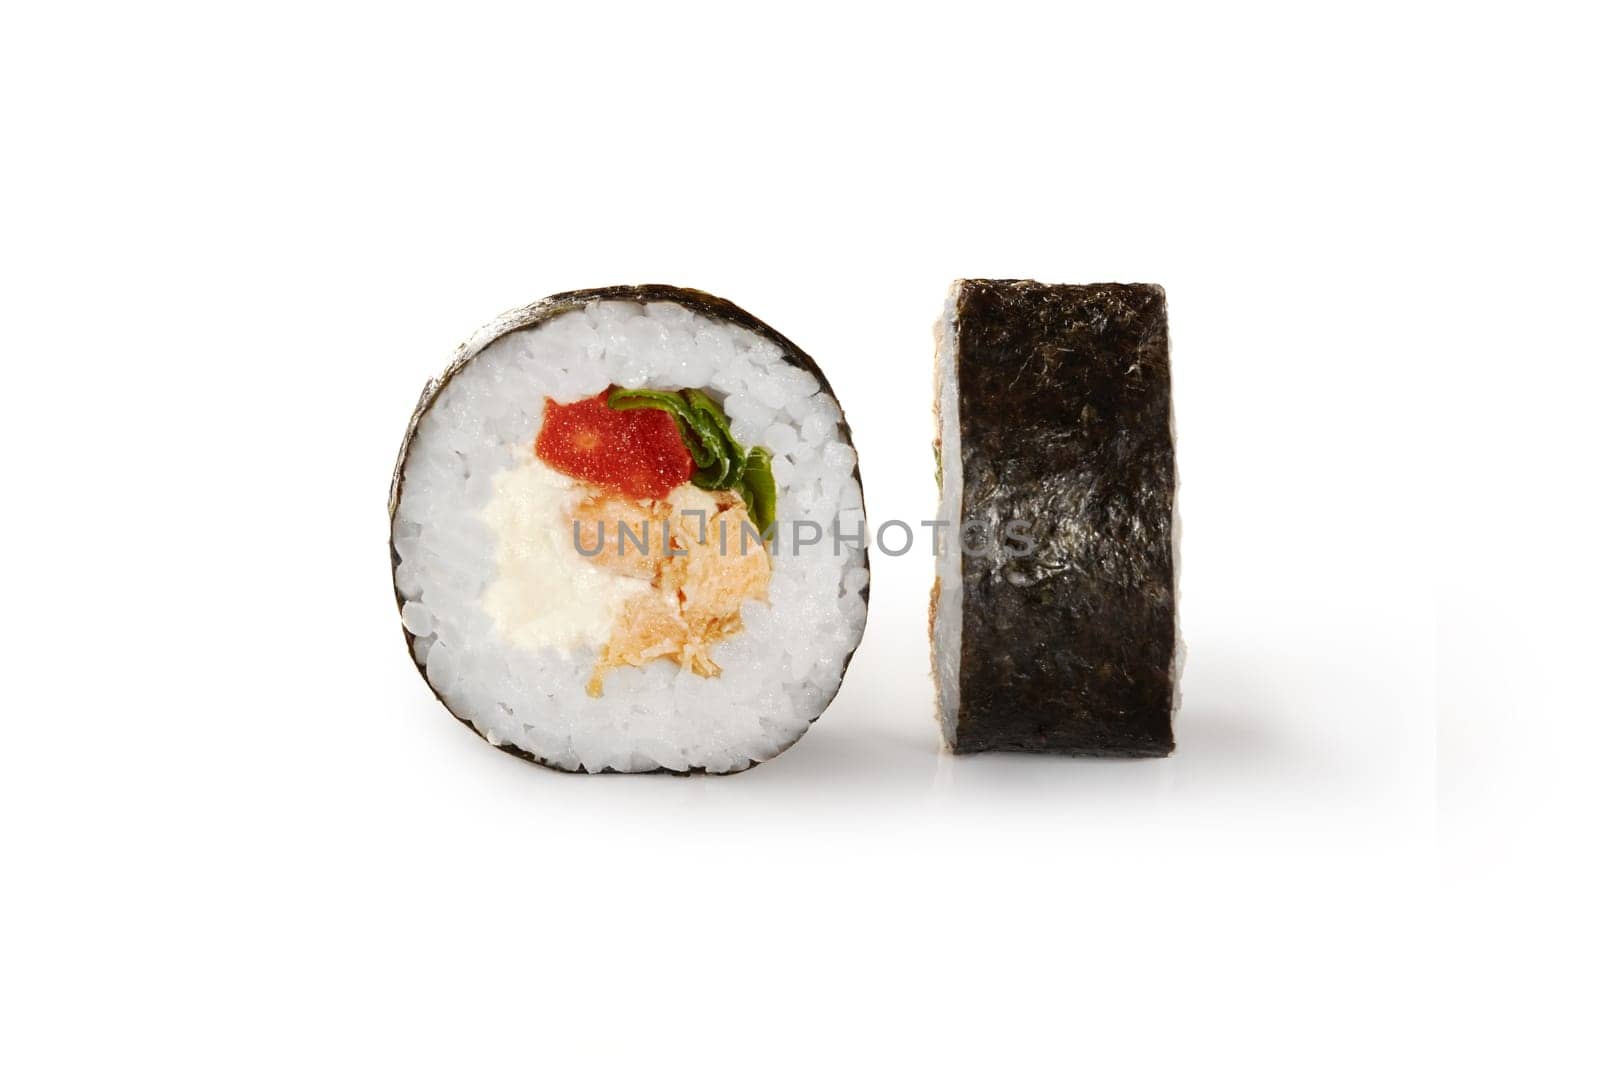 Closeup detailed view of futomaki roll filled with cream cheese, baked salmon, chopped tomatoes and scallions, displayed on white background. Japanese style cuisine